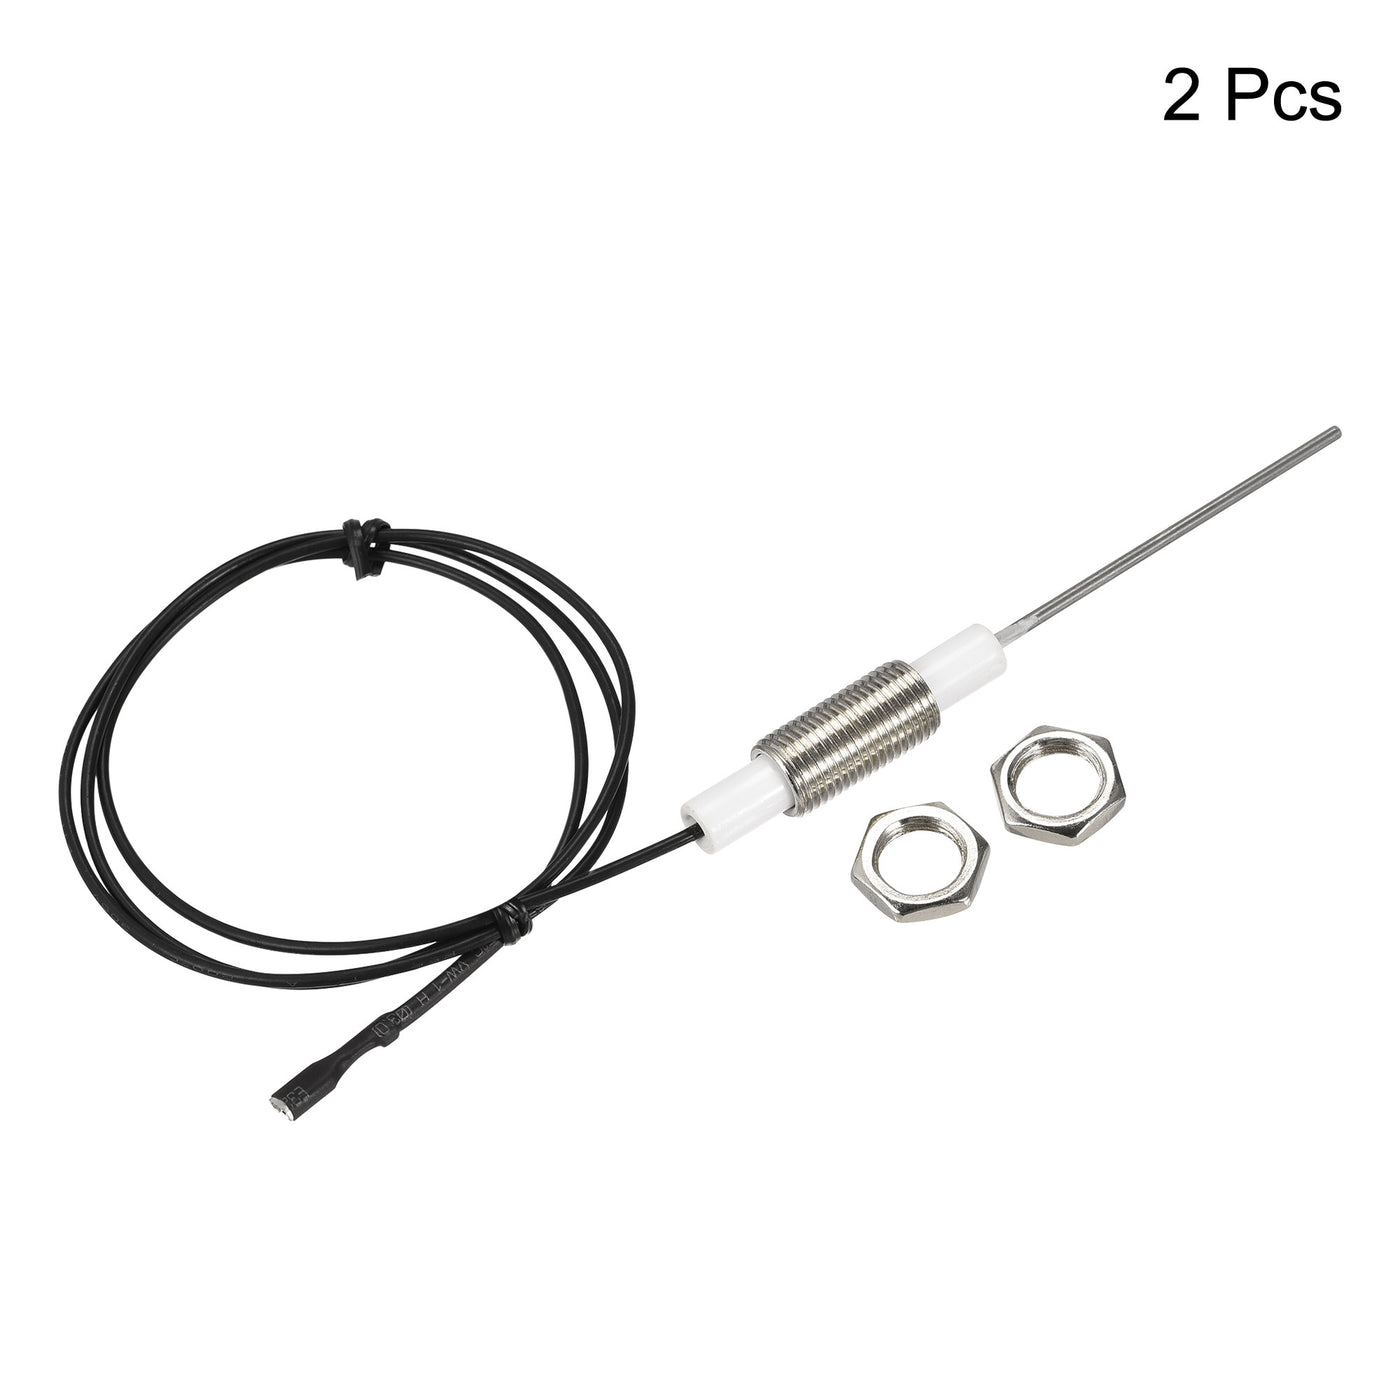 uxcell Uxcell Ignitor Wire Ceramic Electrode Assembly 600mm Length Gas Grill Ignitor Wire Ignition Electrode Replacement 2pcs